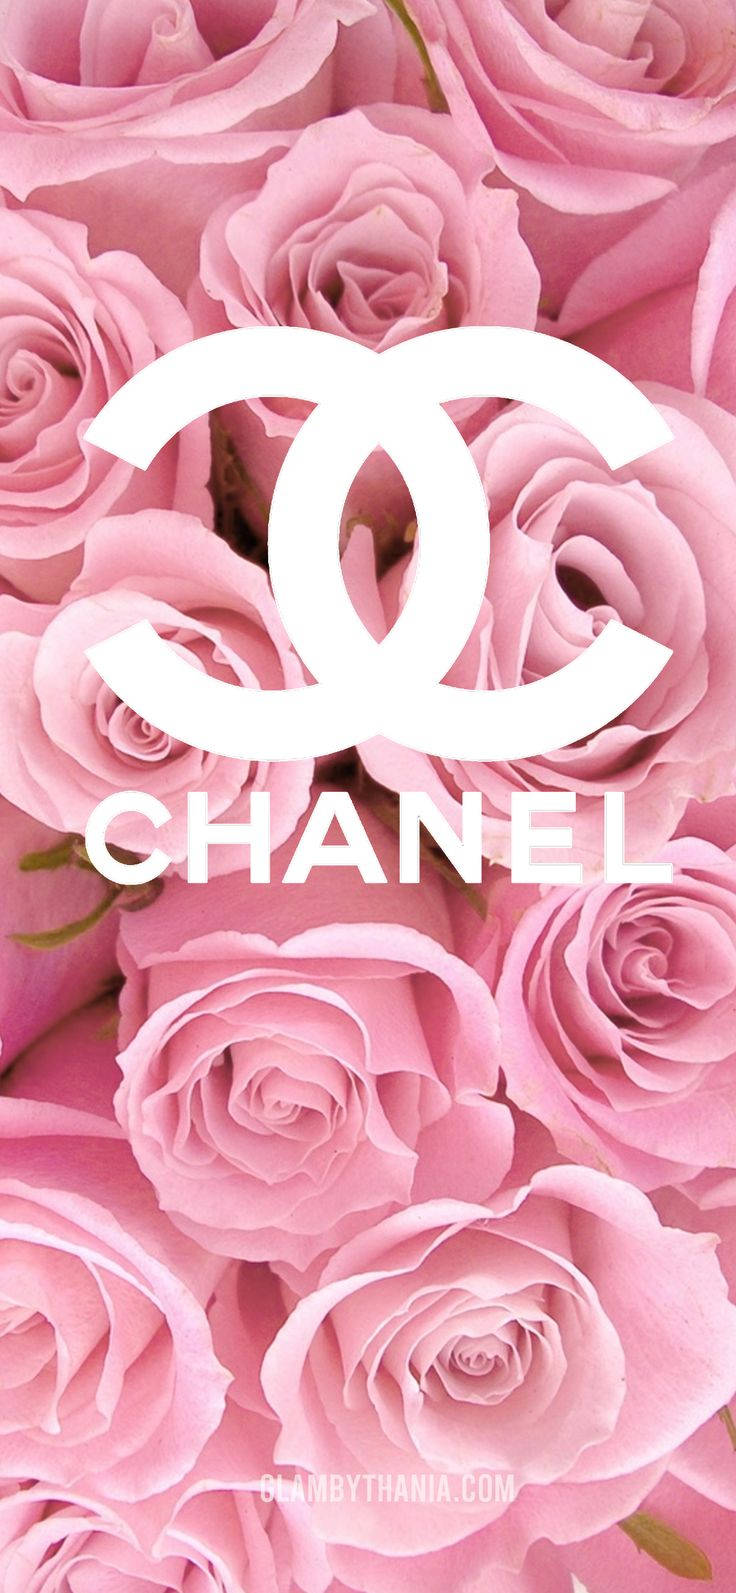 Chanel Roses Girly Iphone Background